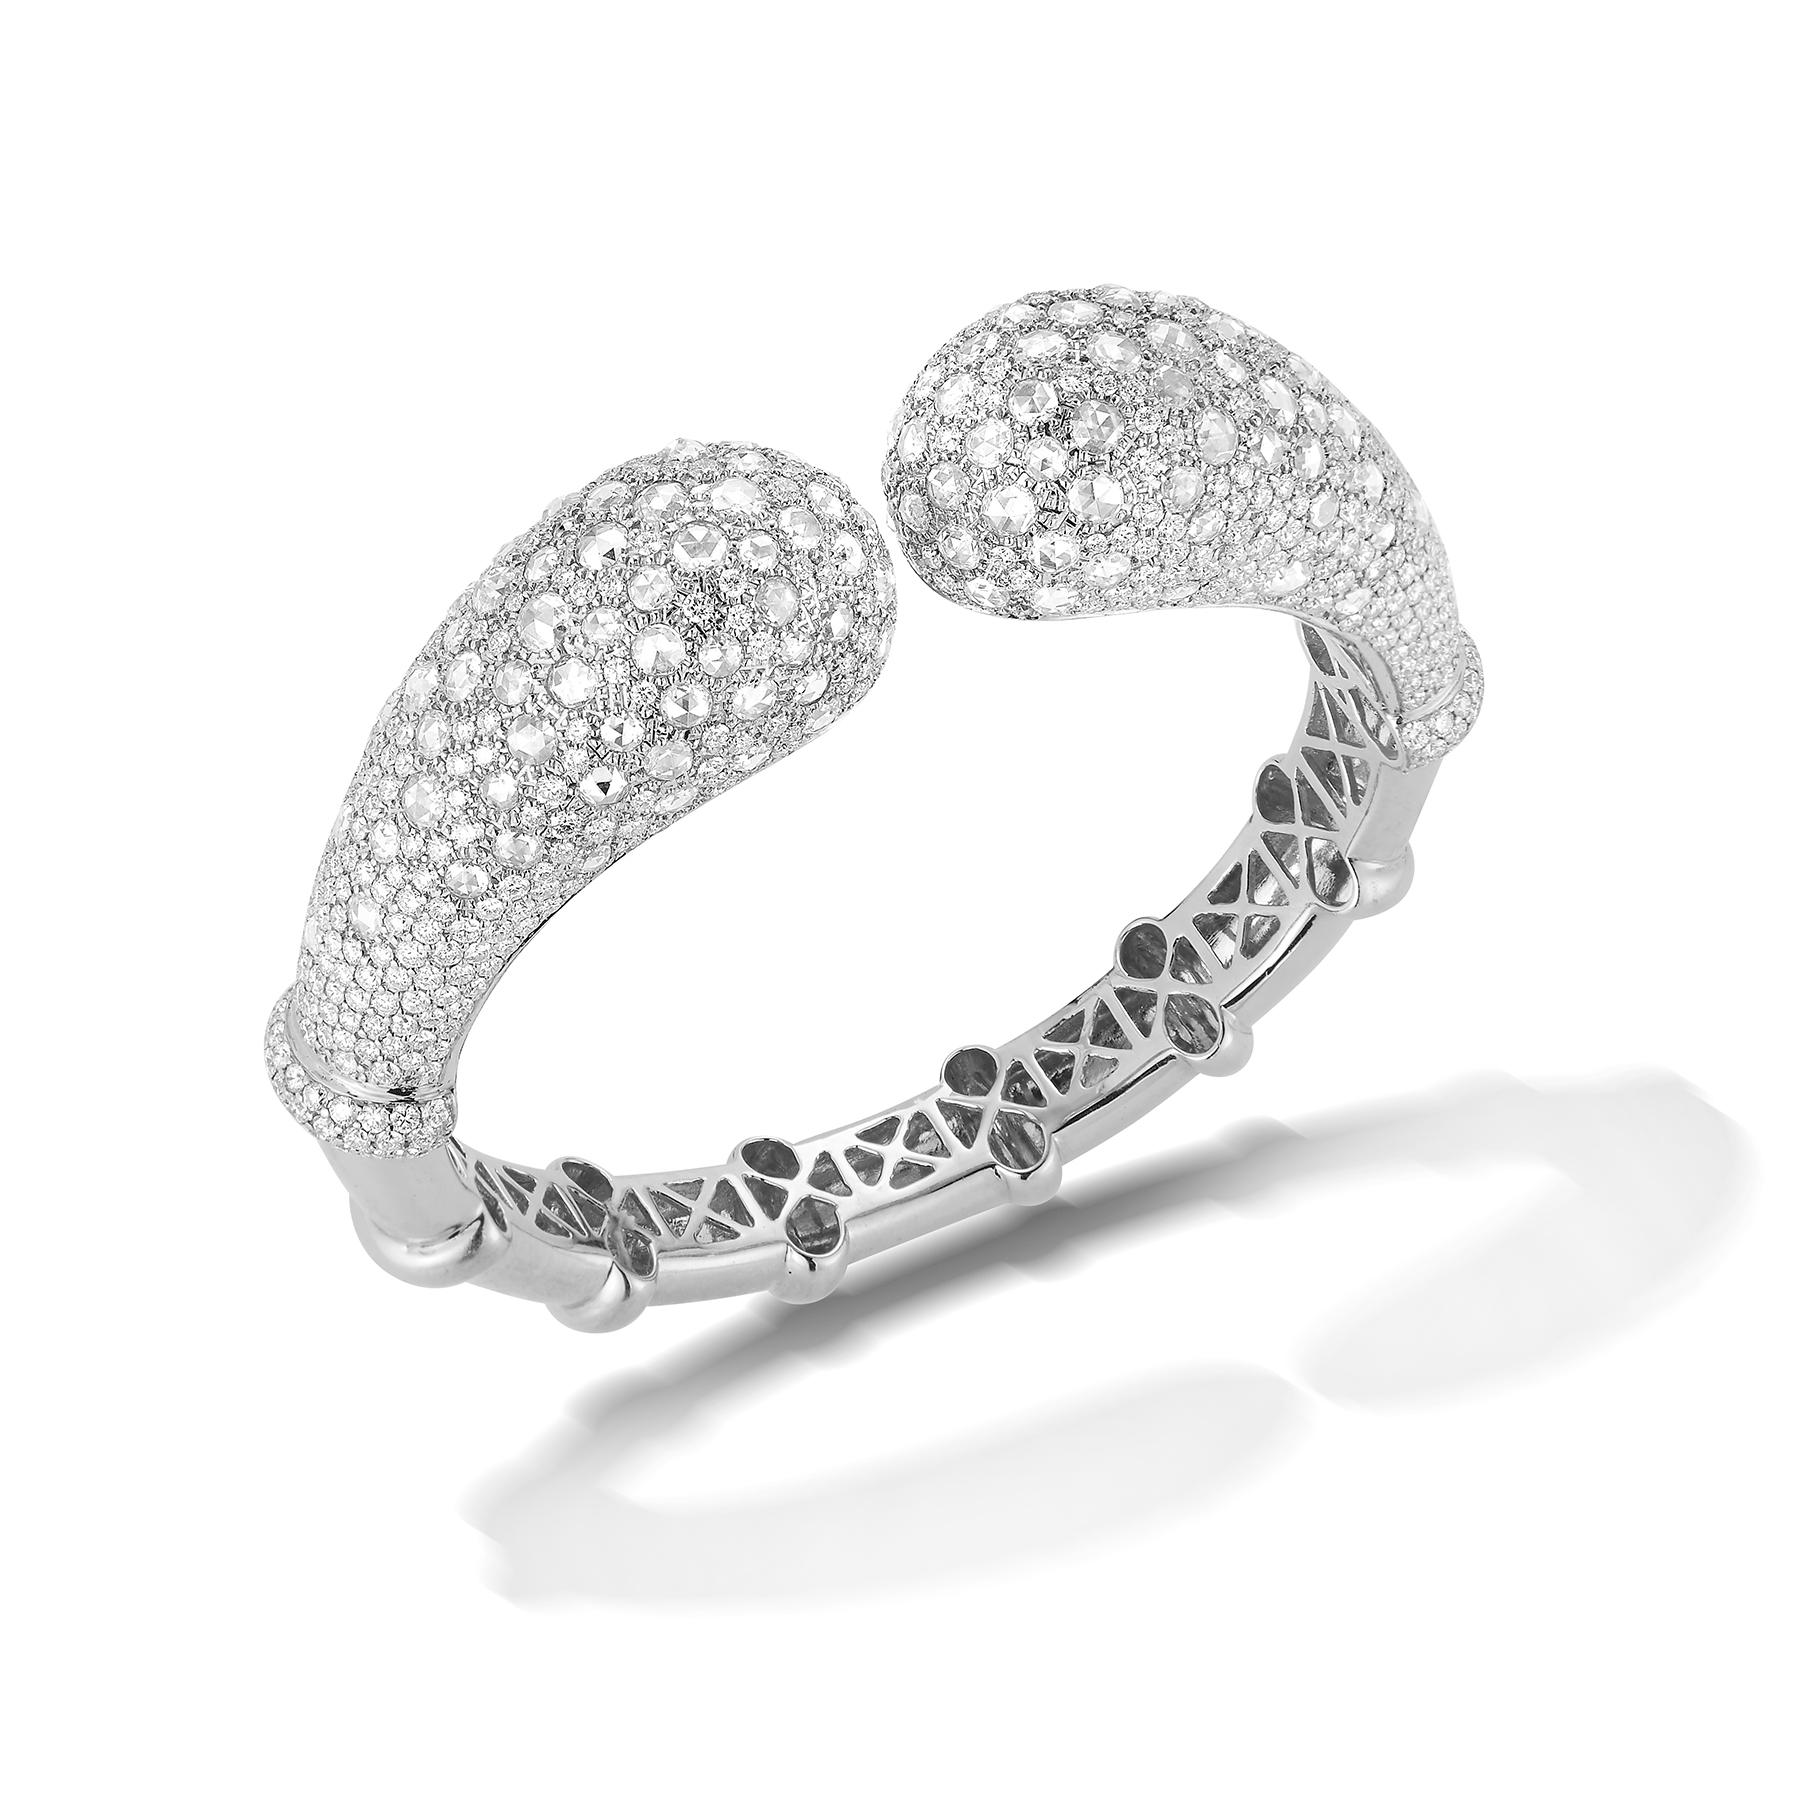 Beautiful 18K White Gold Bangle Bracelet in a wraparound Cuff-Style containing F-VS White Round Diamonds totaling 19.30 Carats.